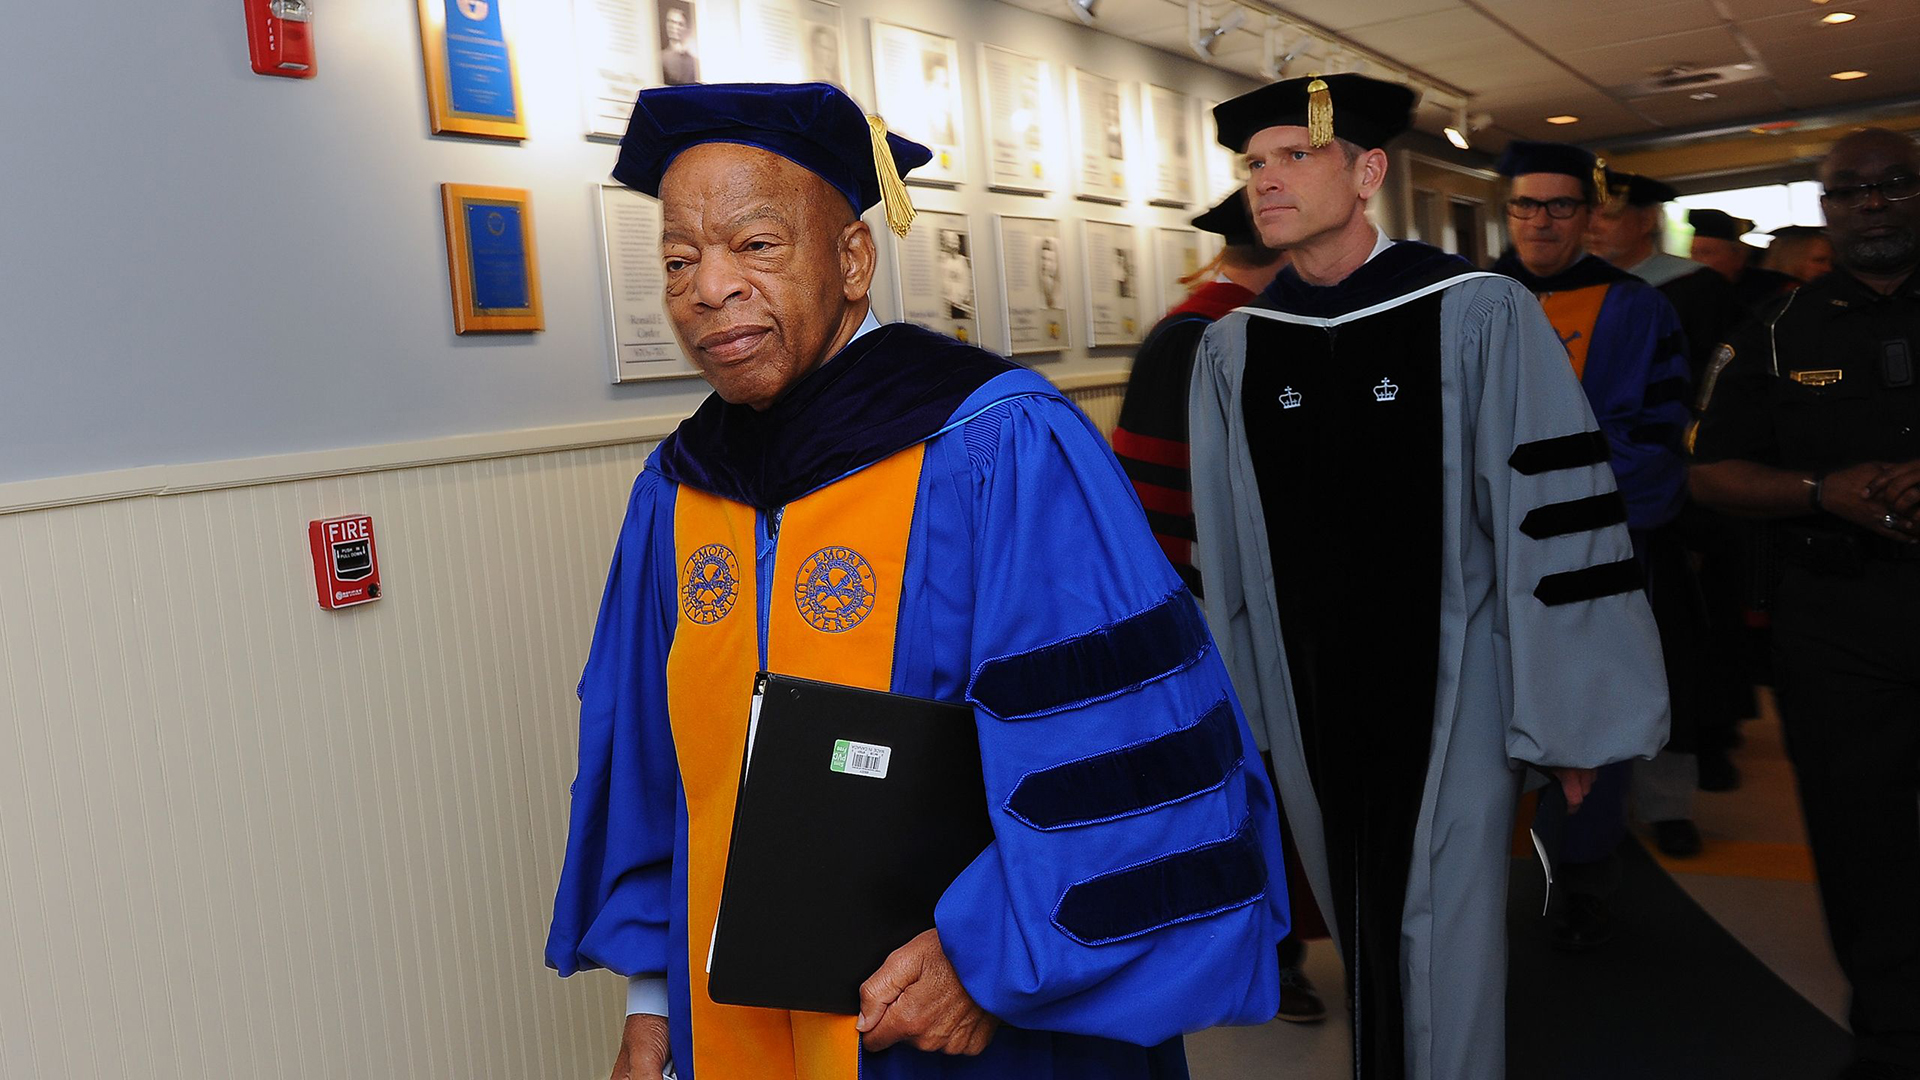 U.S. Rep. John Lewis walks toward the gym for Oxford's Commencement.